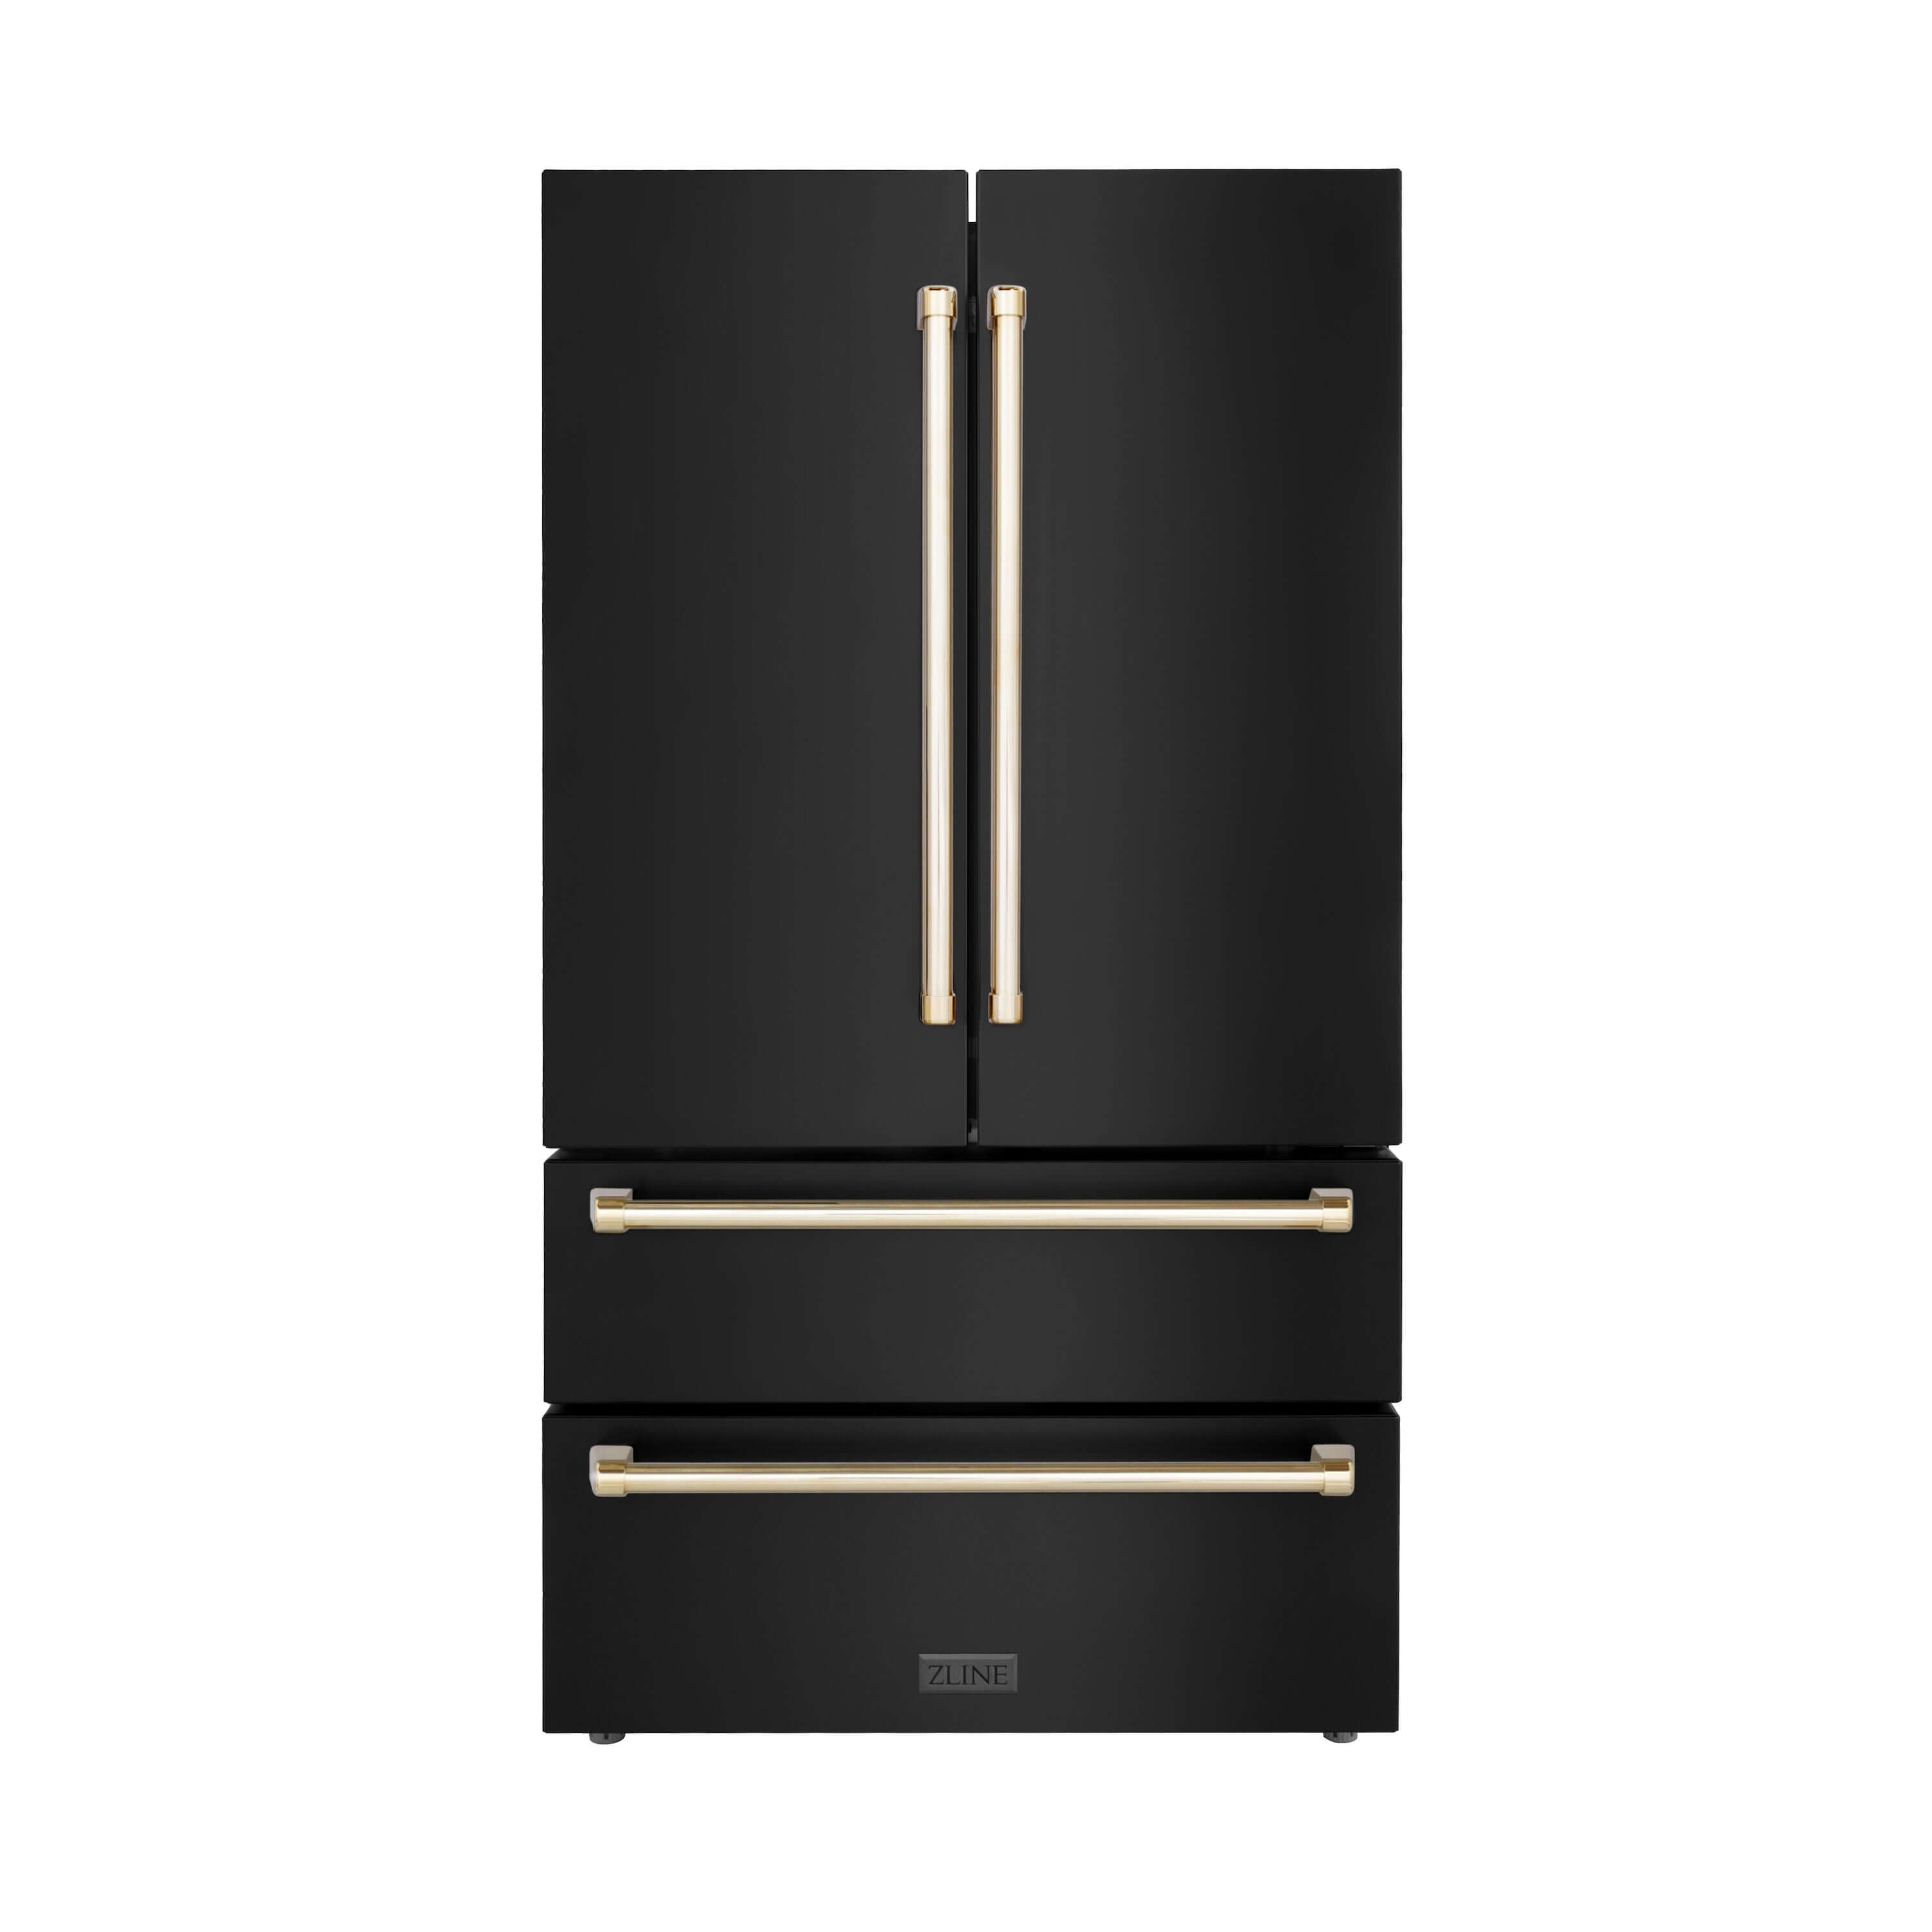 ZLINE Autograph Edition 36" Black Stainless Steel French Door Refrigerator with Gold accents front.